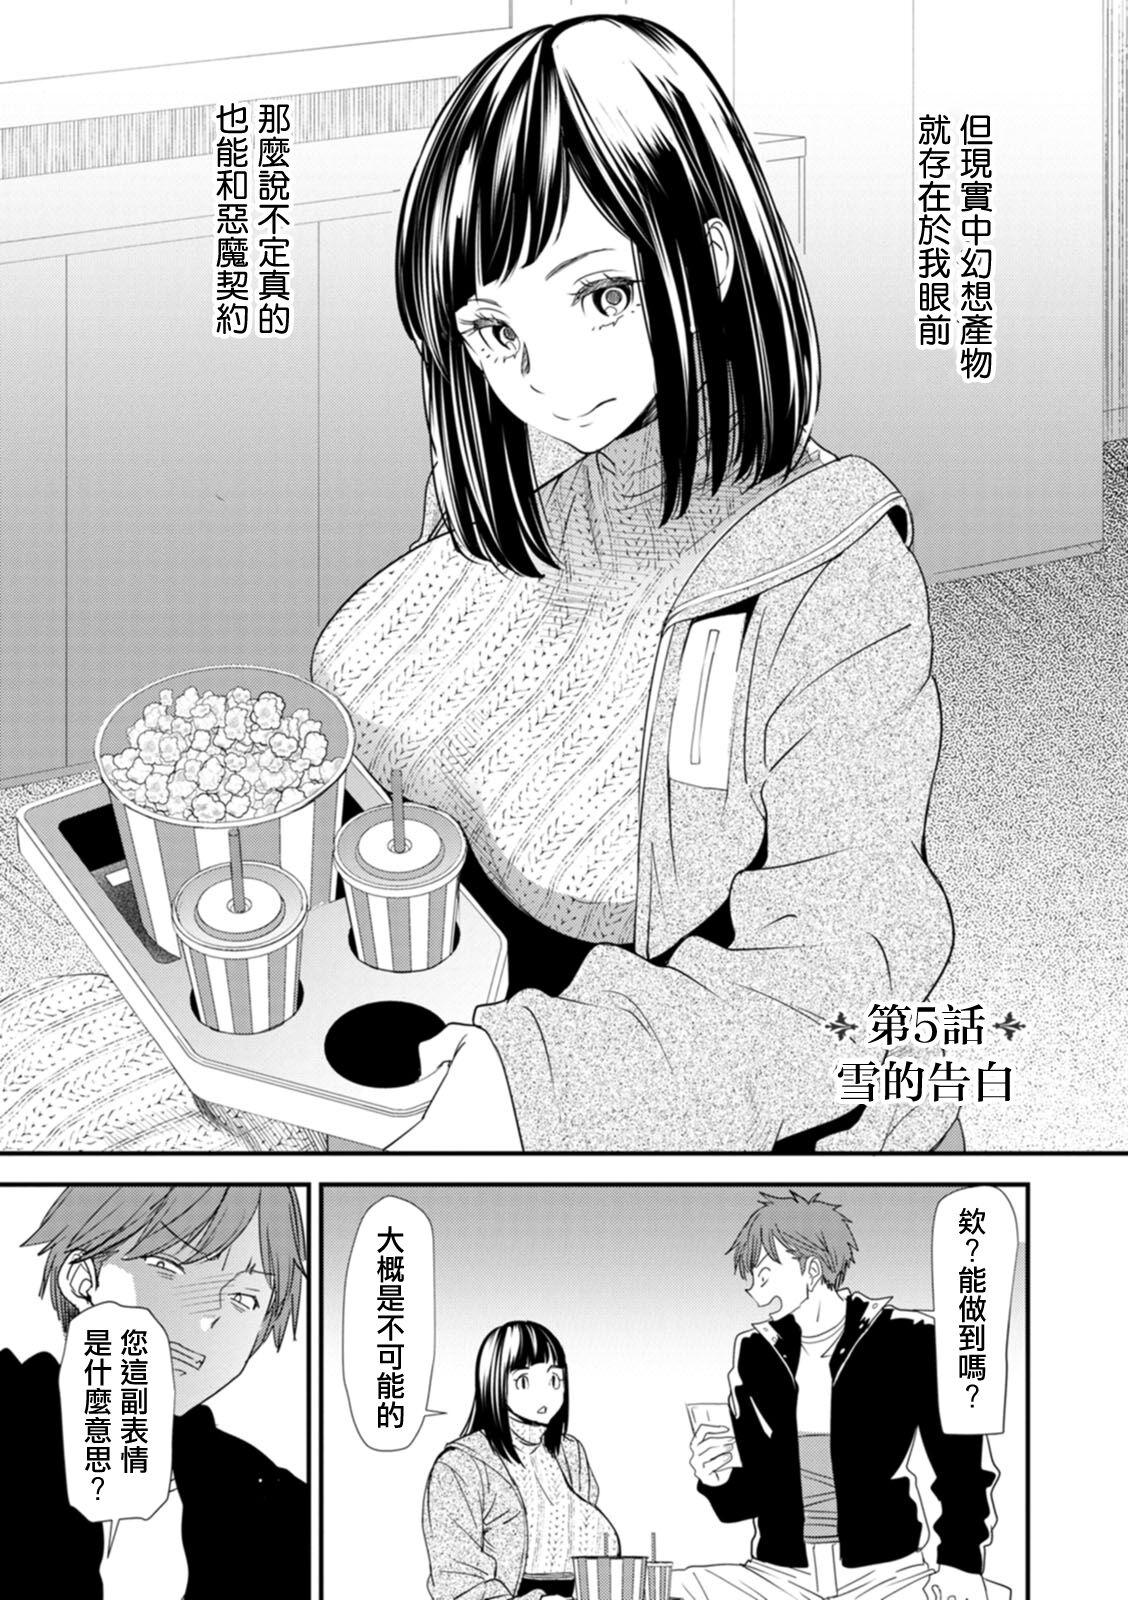 Interracial Inma Joshi Daisei no Yuuutsu - The Melancholy of the Succubus who is a college student Ch. 5 Big Booty - Page 3